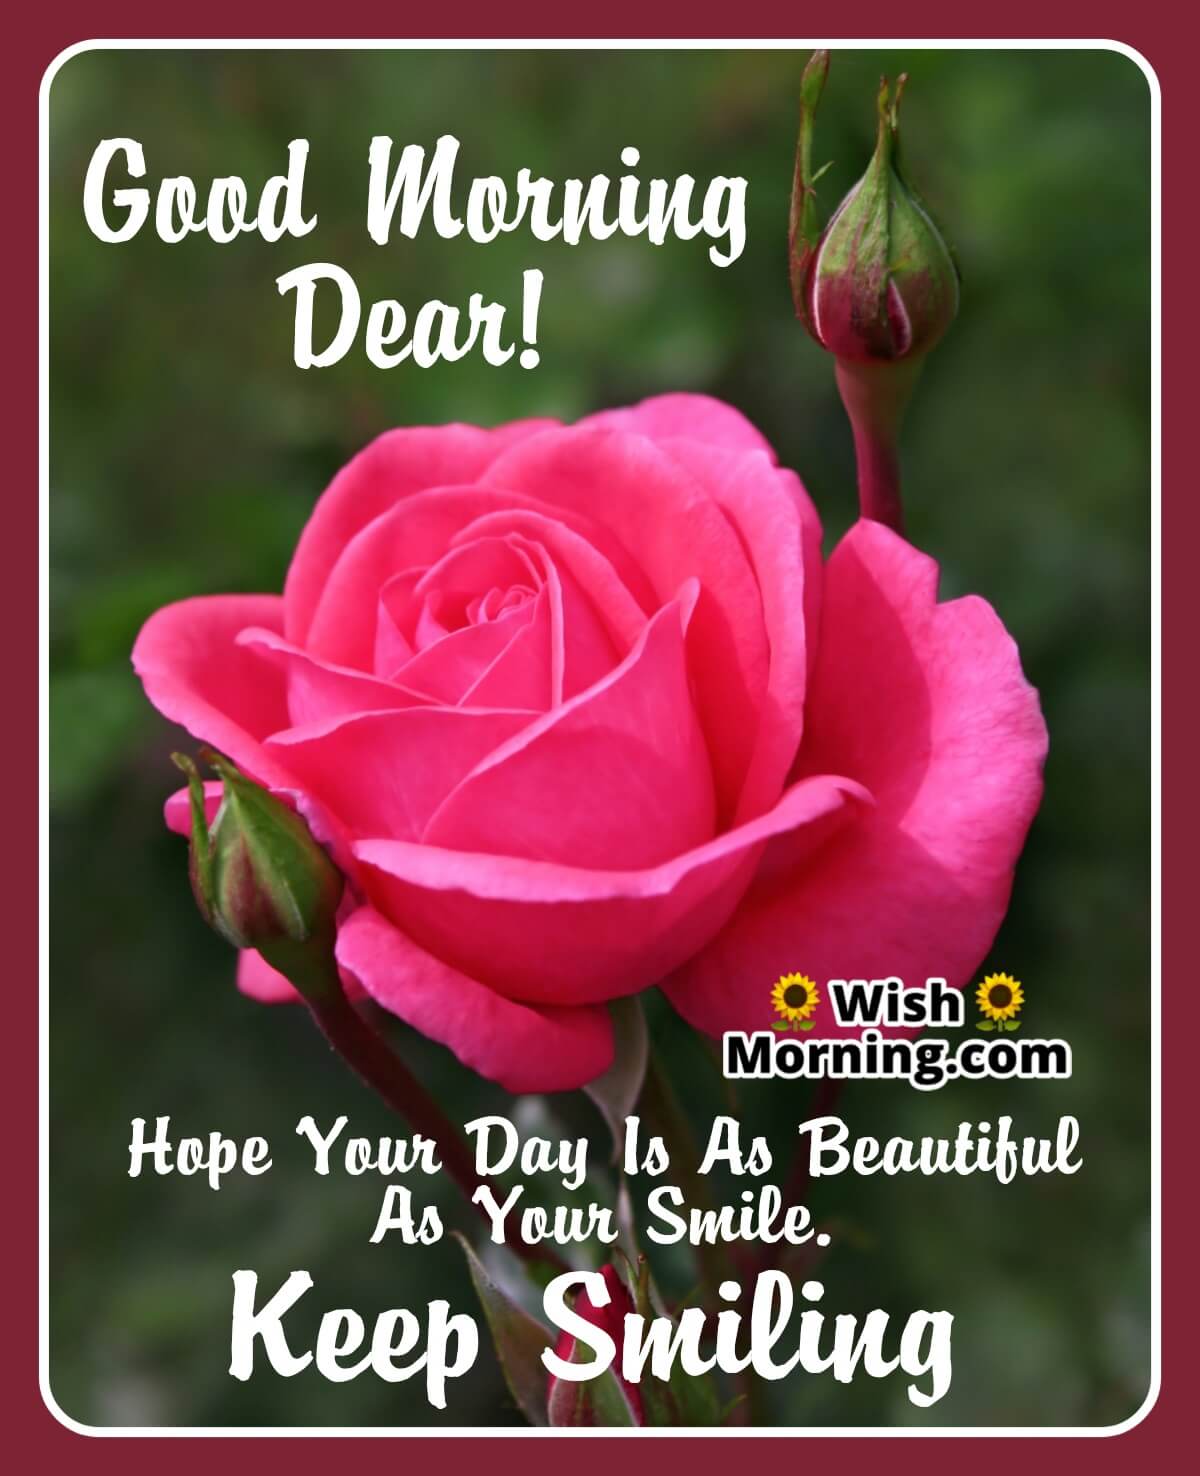 Good Morning Wishes With Rose Flower - Wish Morning